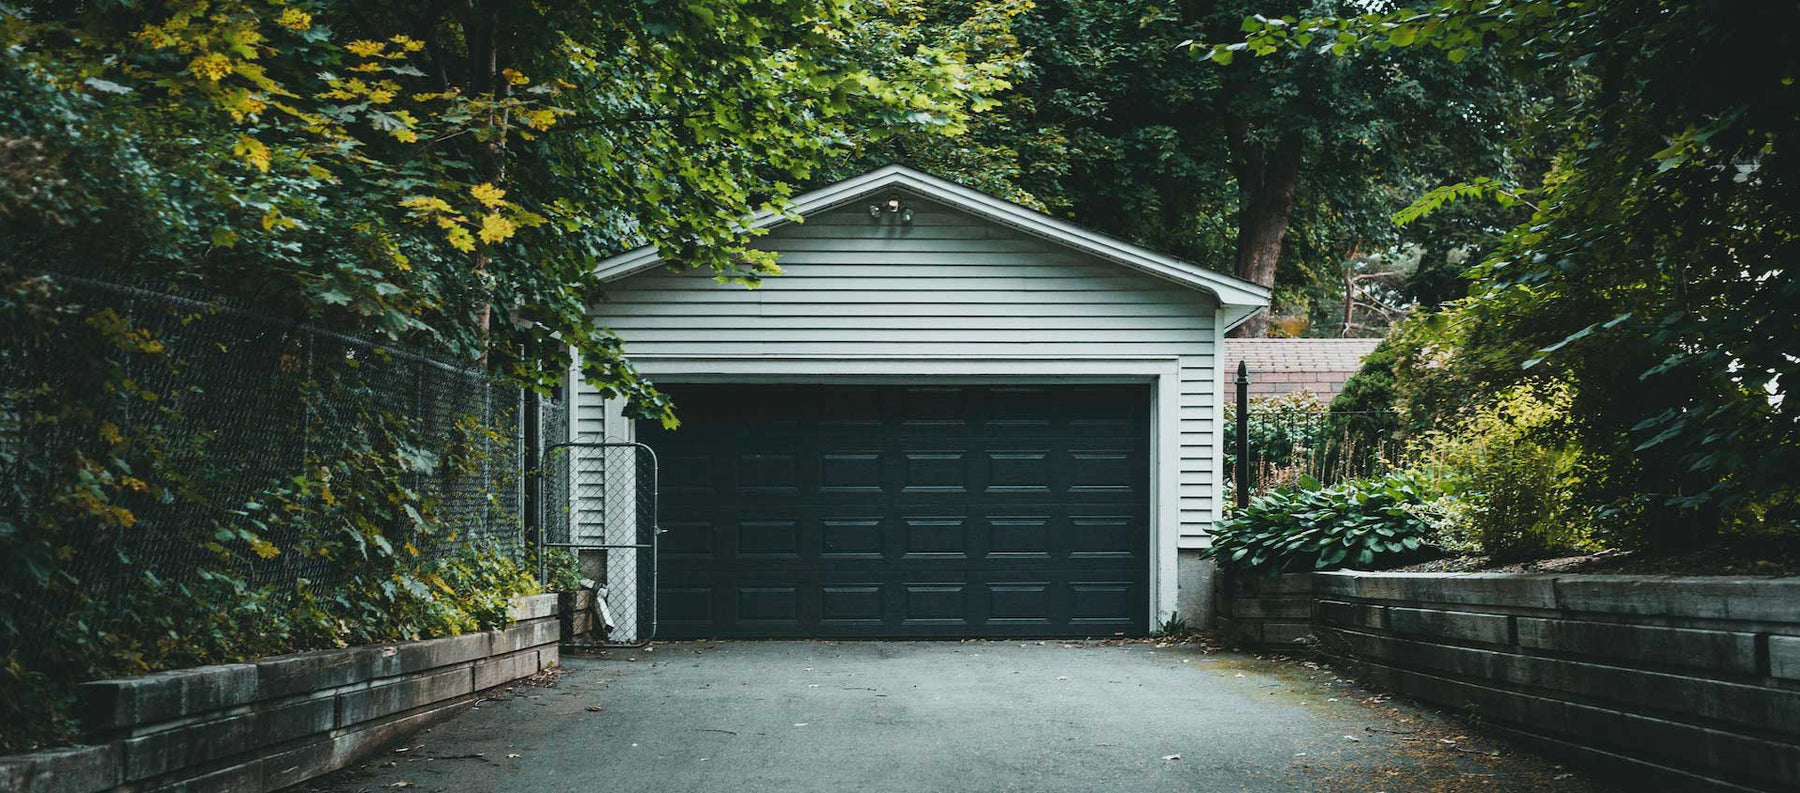 Buying Backup Batteries for Automatic Garage Doors